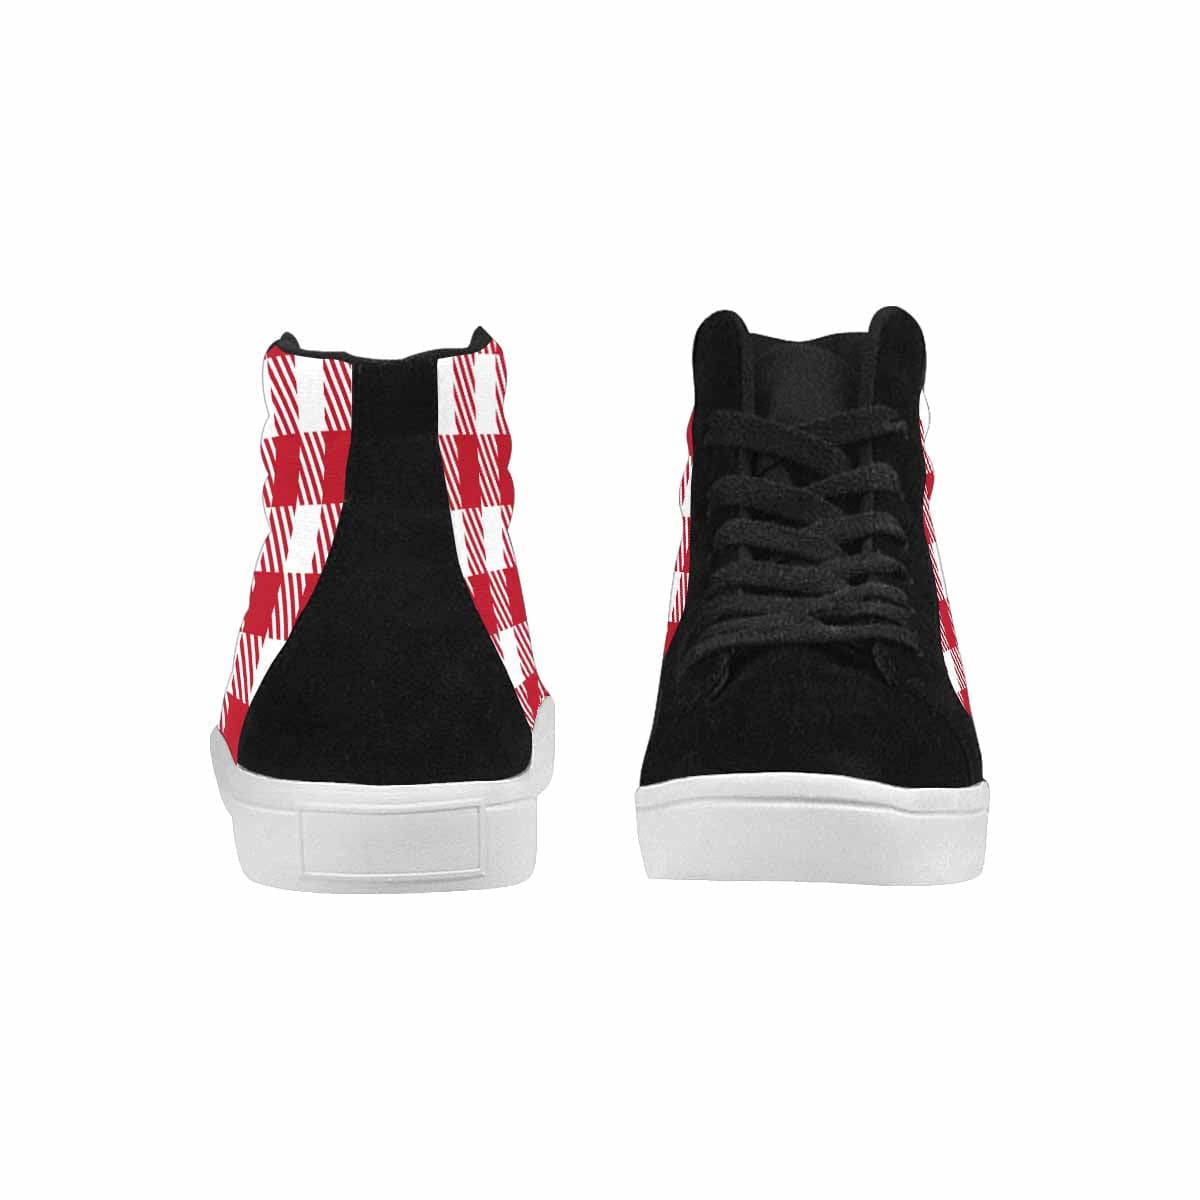 Sneakers For Women, Buffalo Plaid Red And White - High Top Sports Shoes-2